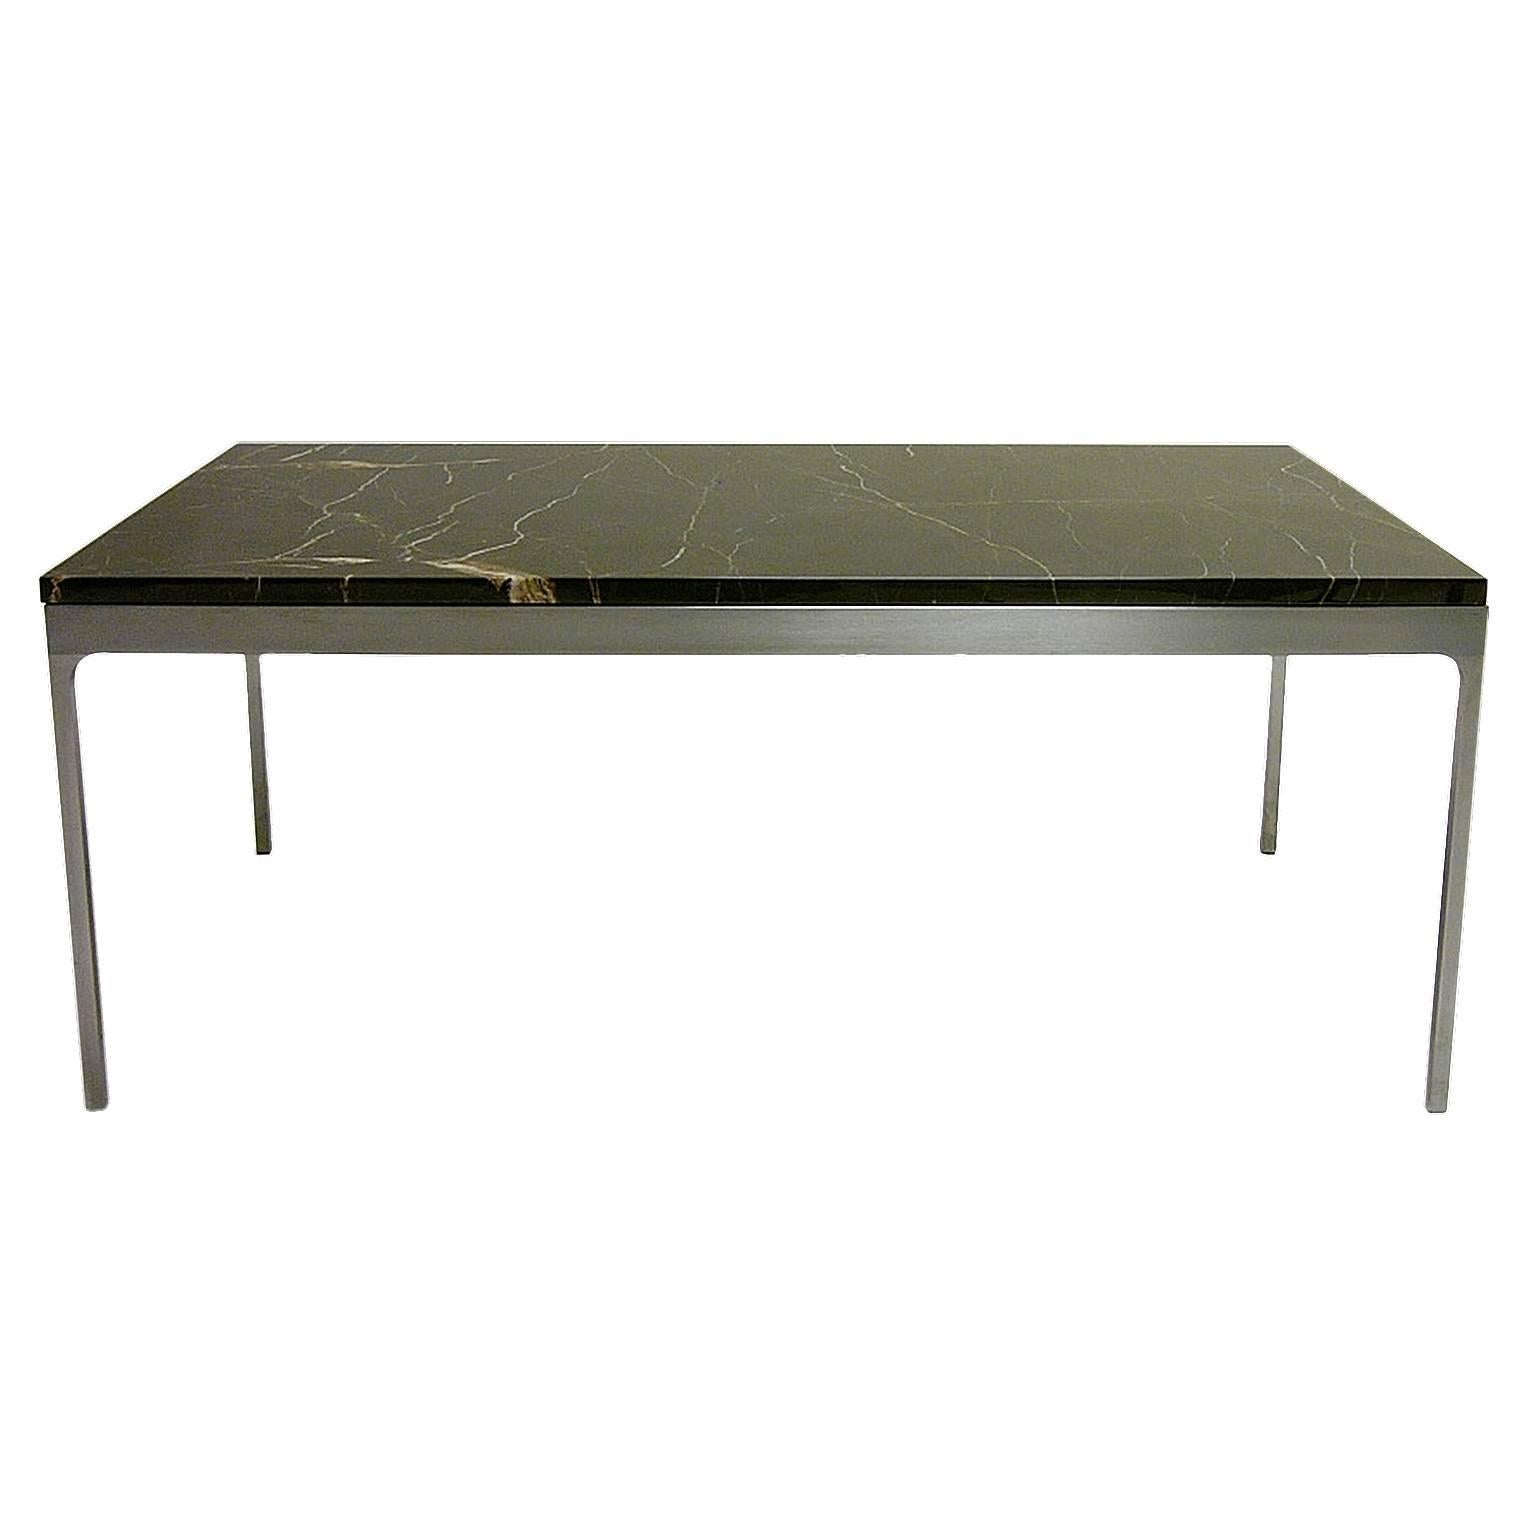 Nicos Zographos Steel and Black Marble Nero Marquina Coffee or Cocktail Table